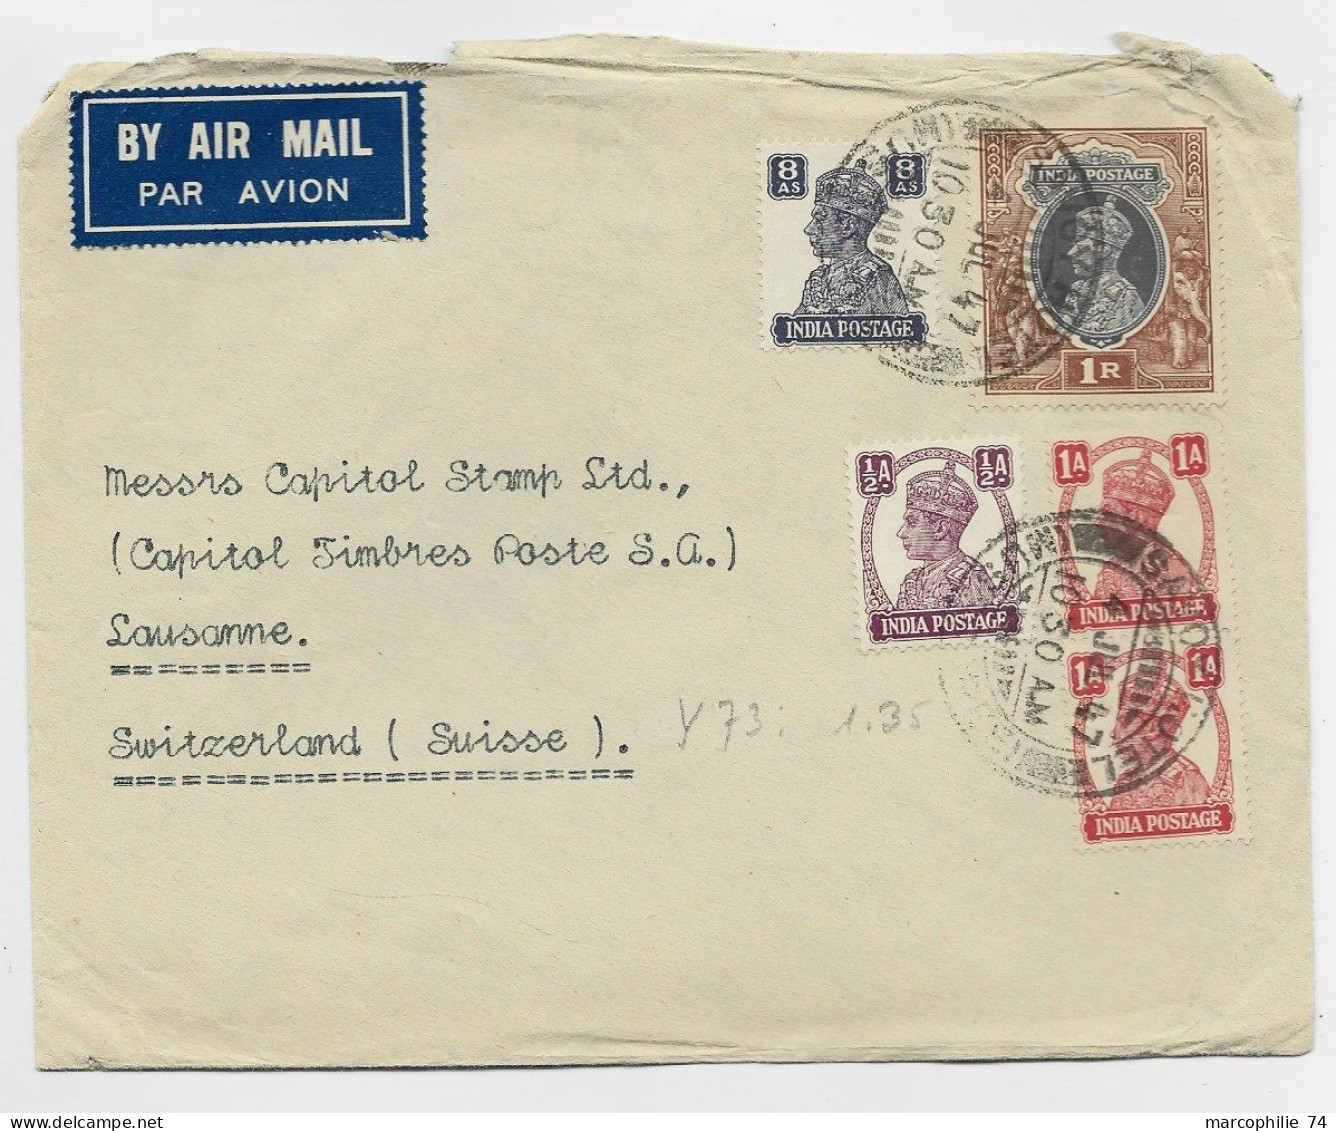 INDIA 1R +8AS+1/2 AS+ 1AX2 LETTRE COVER AIR MAIL SAVOY HOTEL 1947 TO SUISSE - 1936-47 Koning George VI